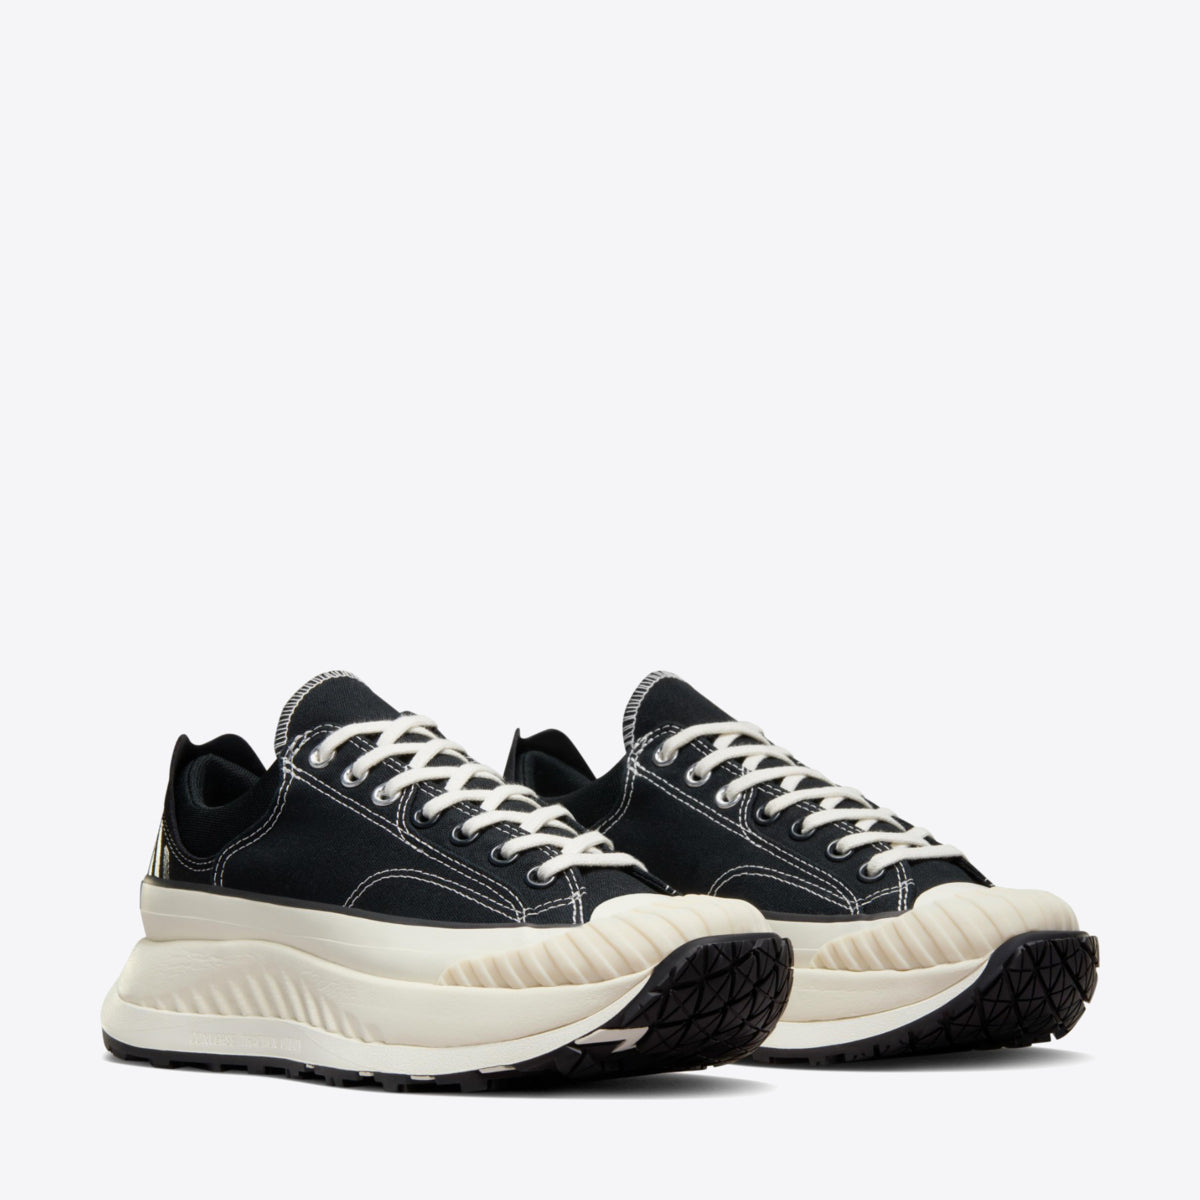 CONVERSE CT 70 AT Future Utility Low Black - Image 5